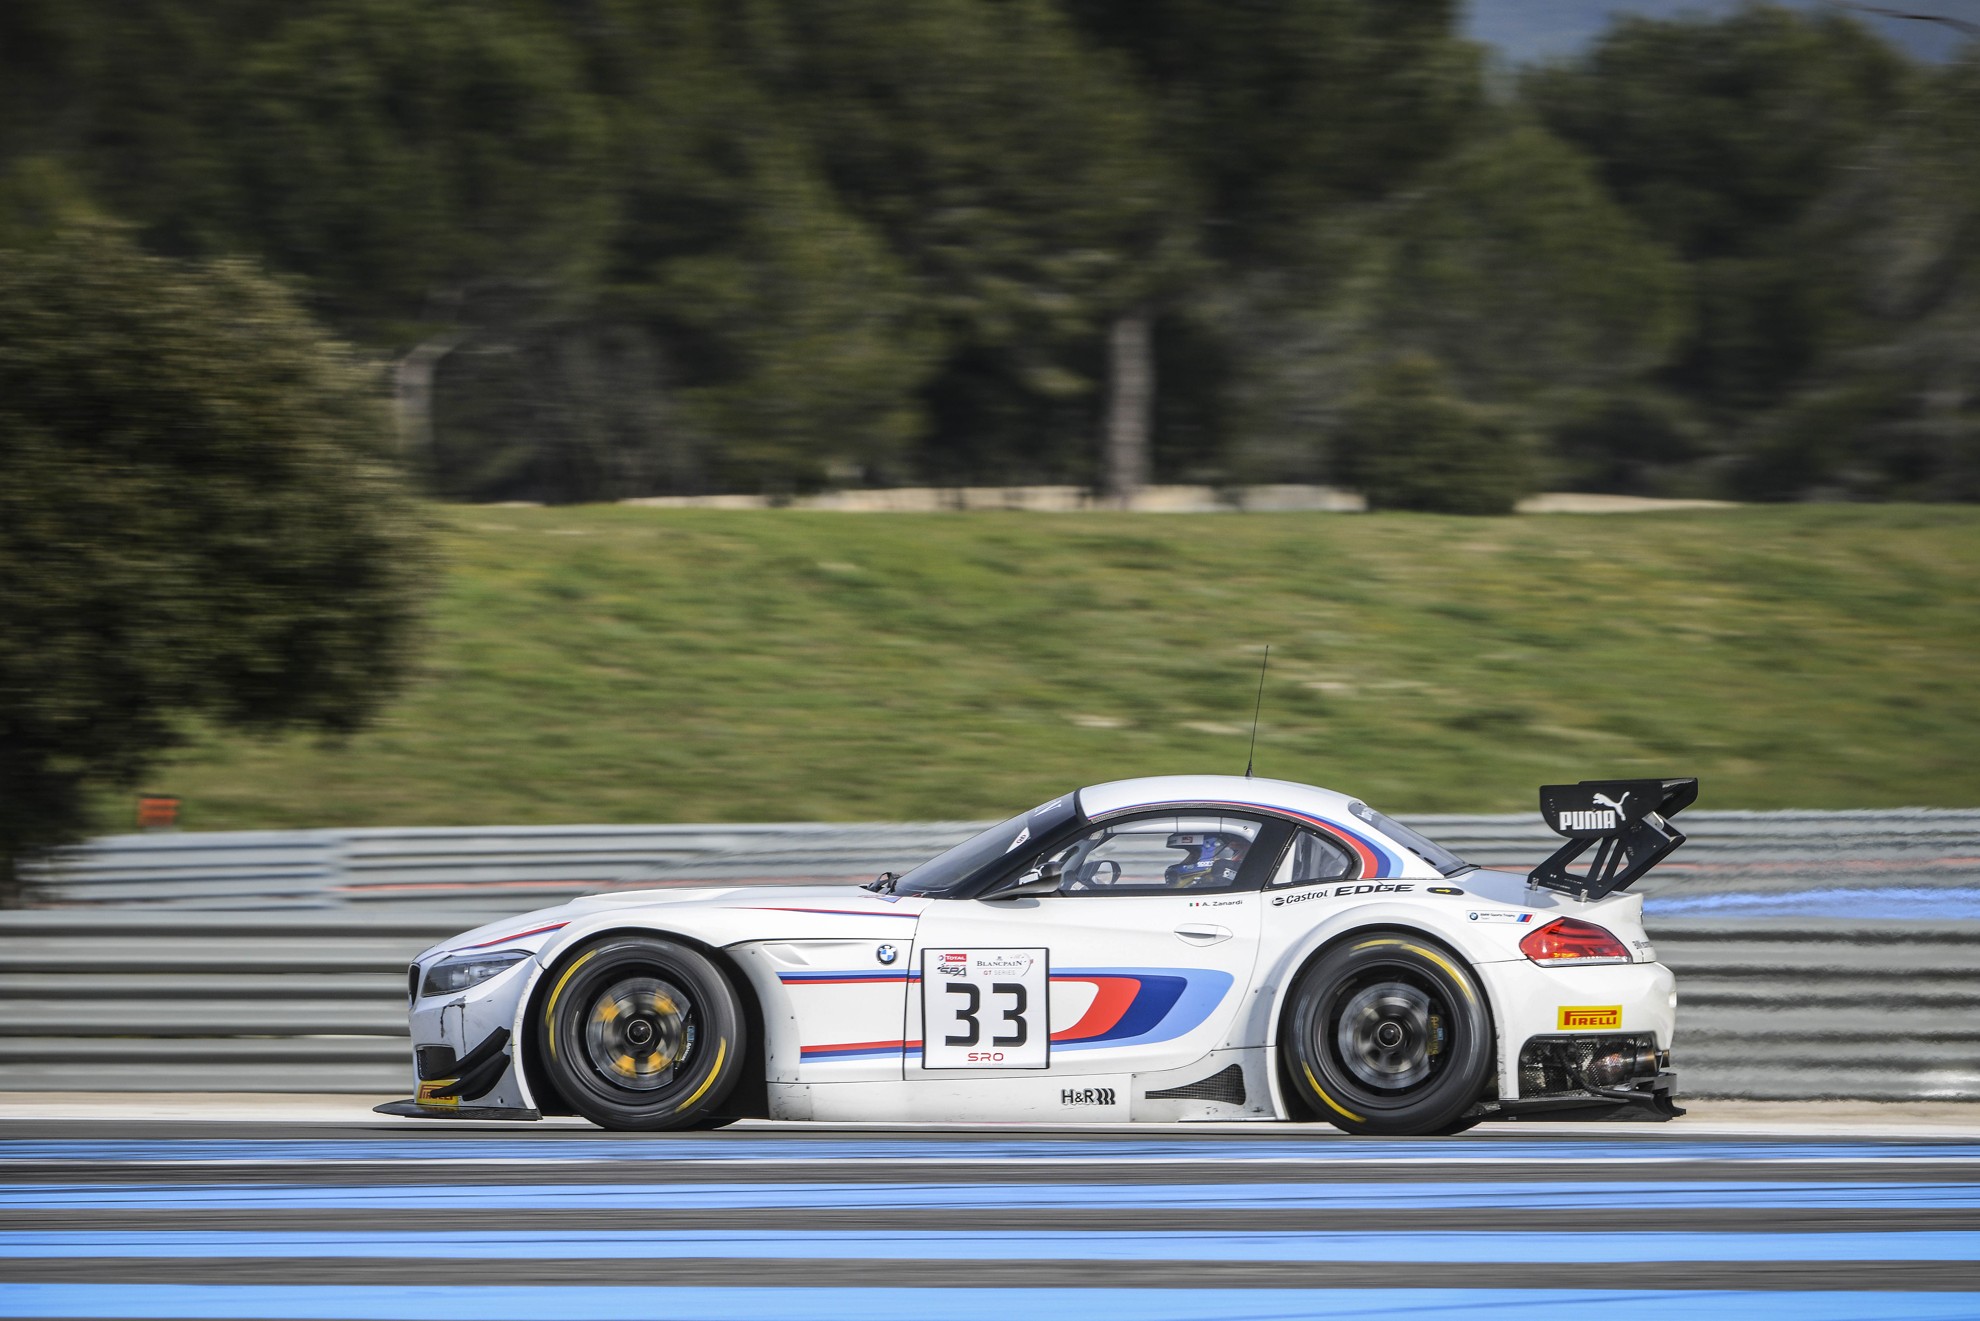 BMW works driver Alessandro Zanardi completes official test days for the Blancpain GT Series